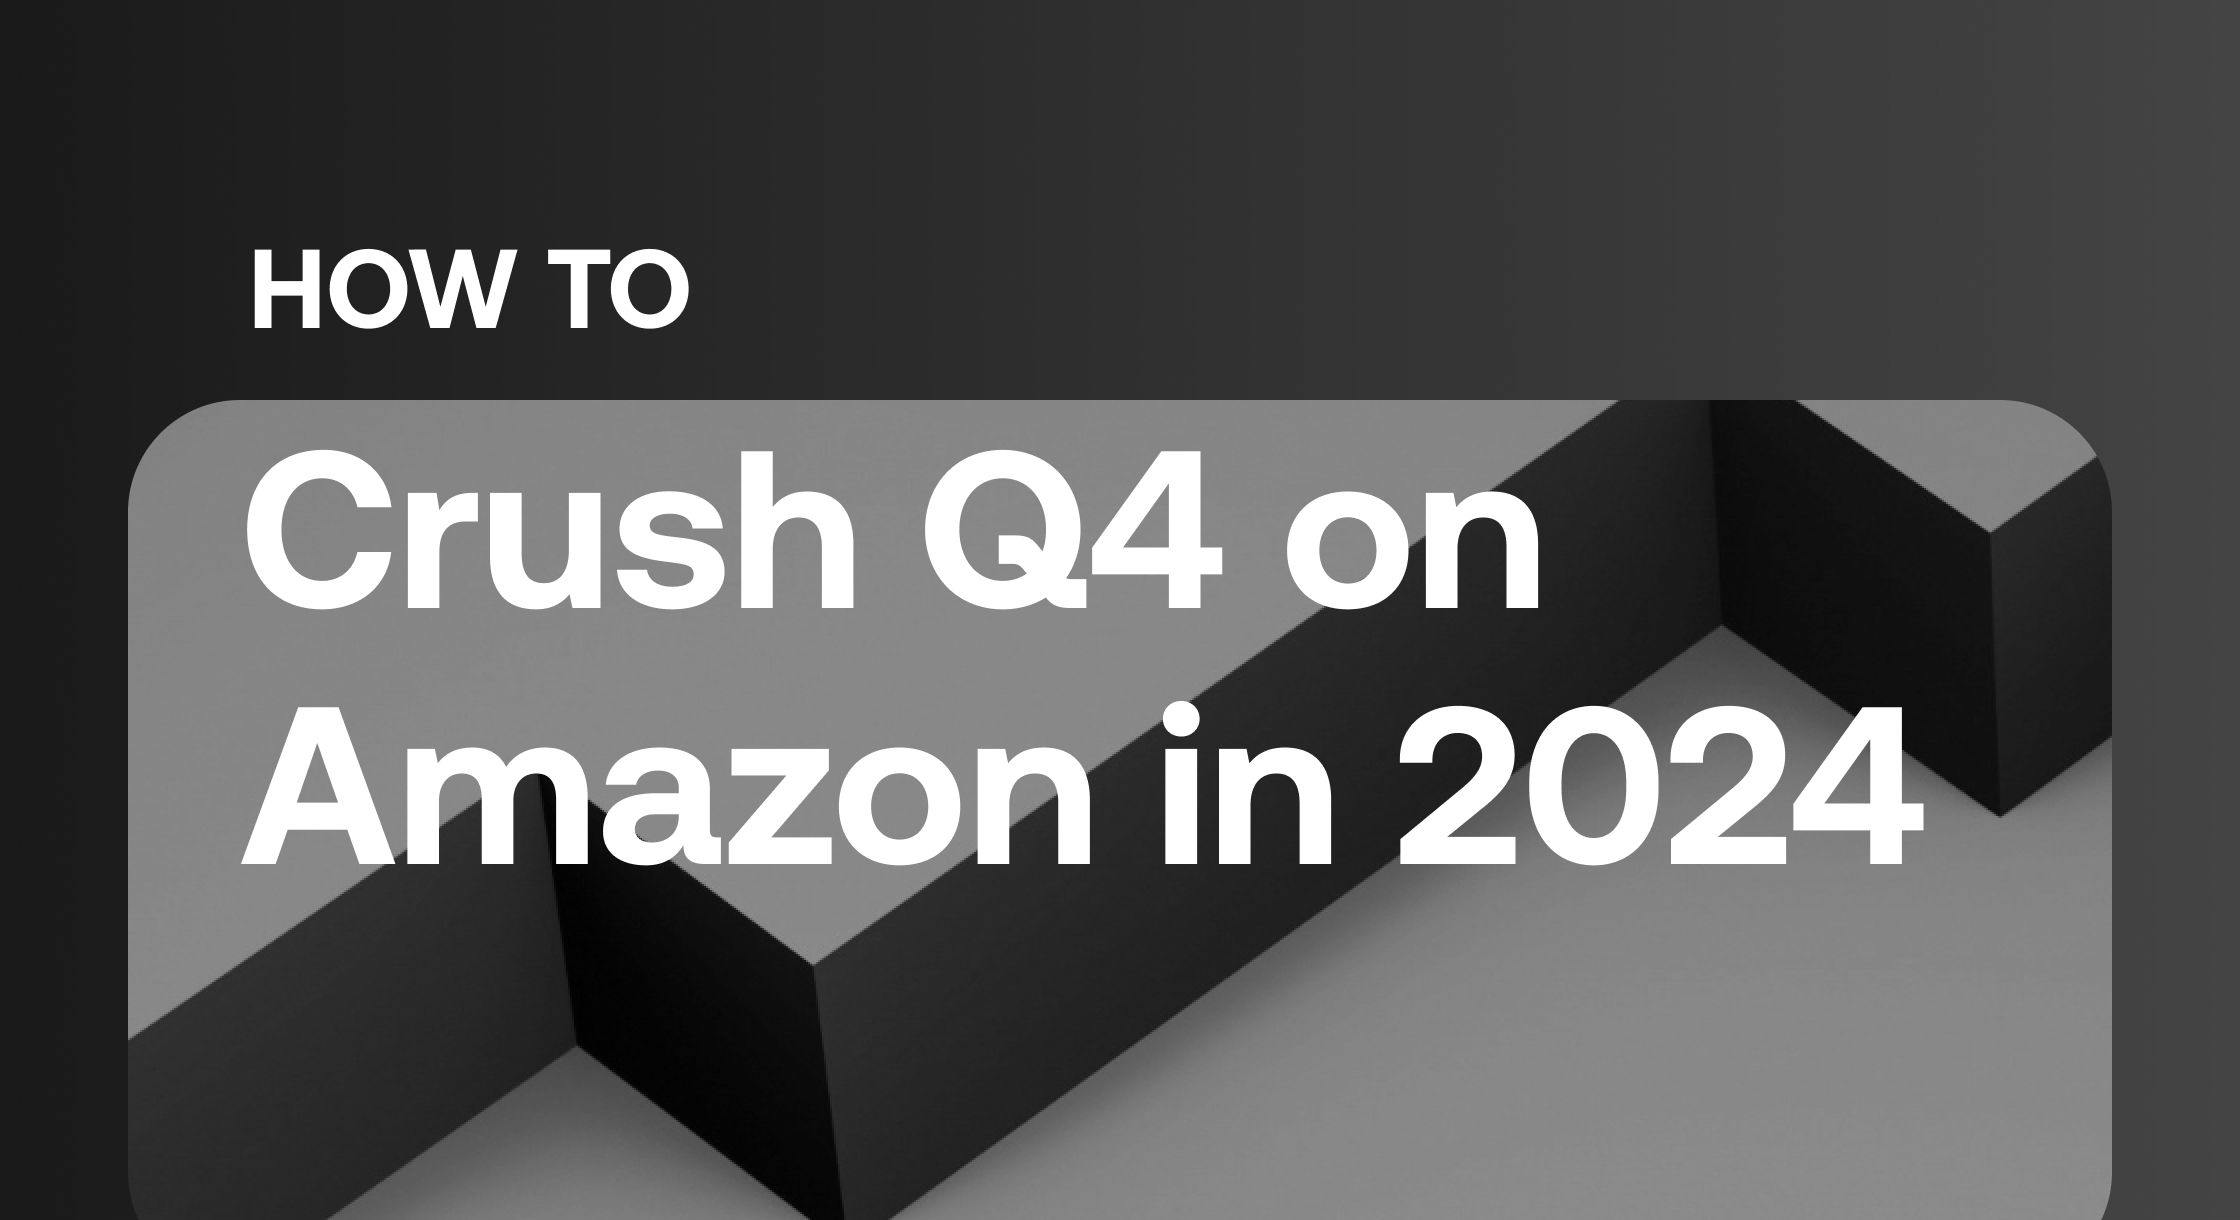 How to Crush Q4 on Amazon in 2024